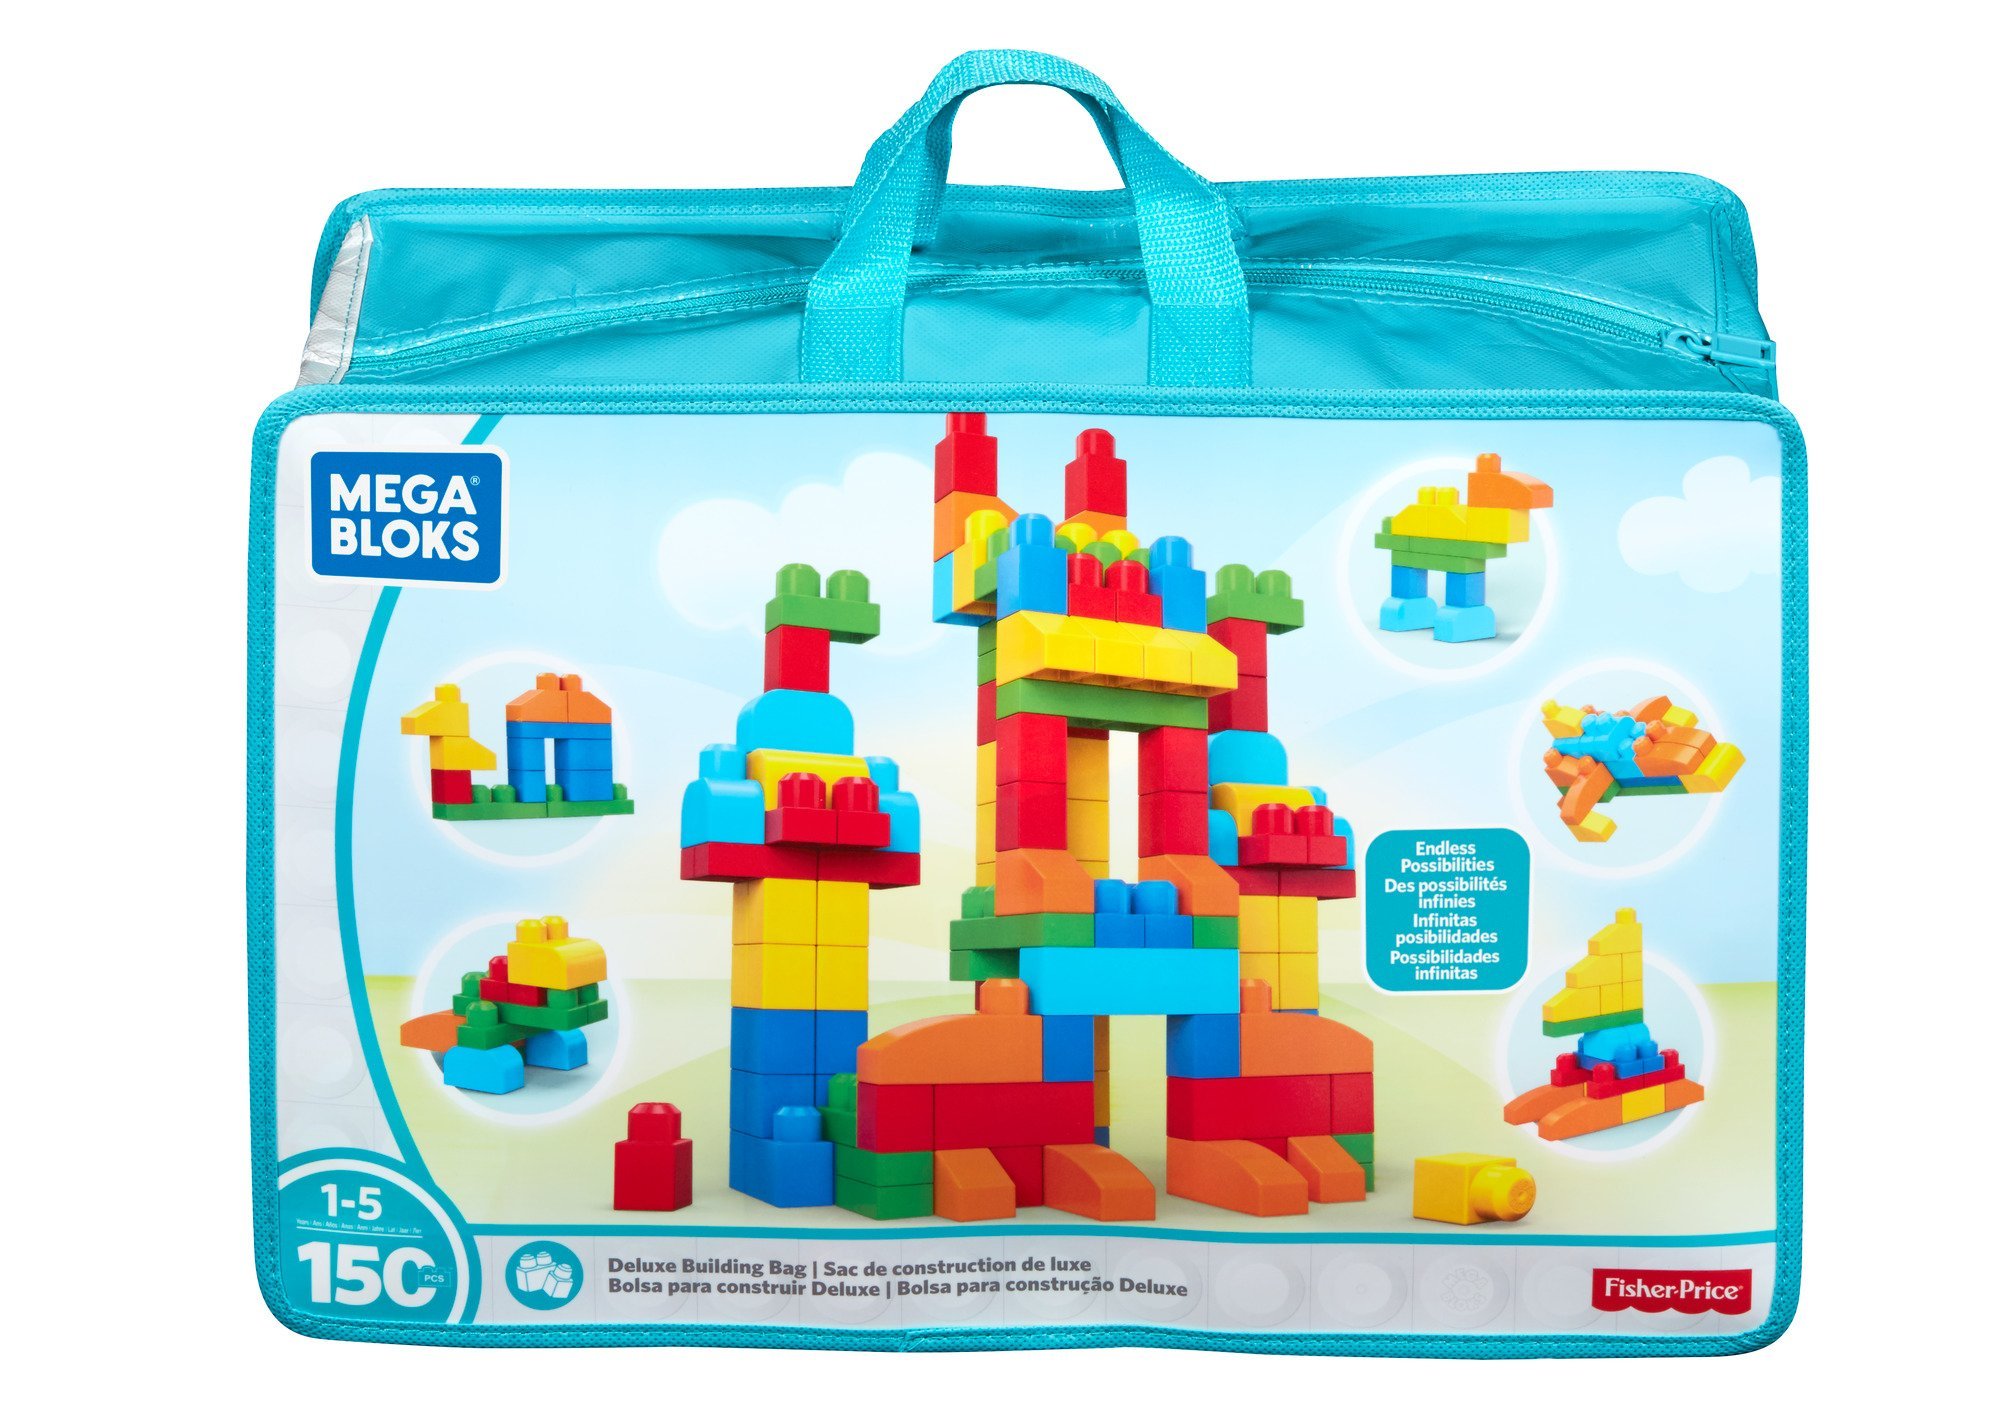 Book Cover MEGA BLOKS Fisher Price Toddler Block Toys, Deluxe Building Bag With 150 Pieces and Storage Bag, Gift Ideas For Kids Age 1+ Years 1 pack (Deluxe Bag)